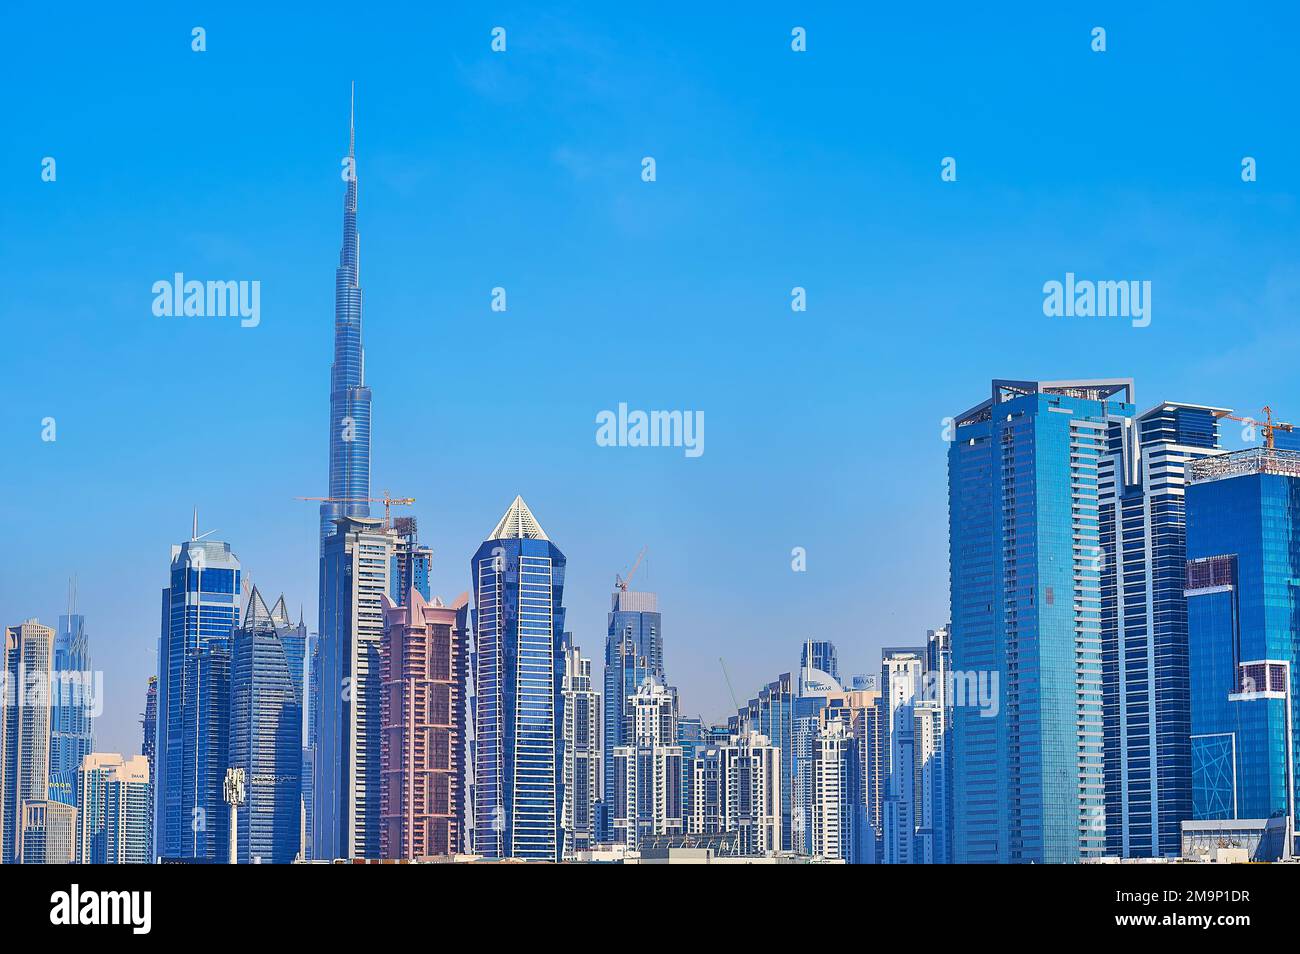 DUBAI, UAE - MARCH 6, 2020: Panorama of the dense Business Bay architecture with Falcon Tower, Escape Tower, Al BathaTower, Single Business Tower and Stock Photo